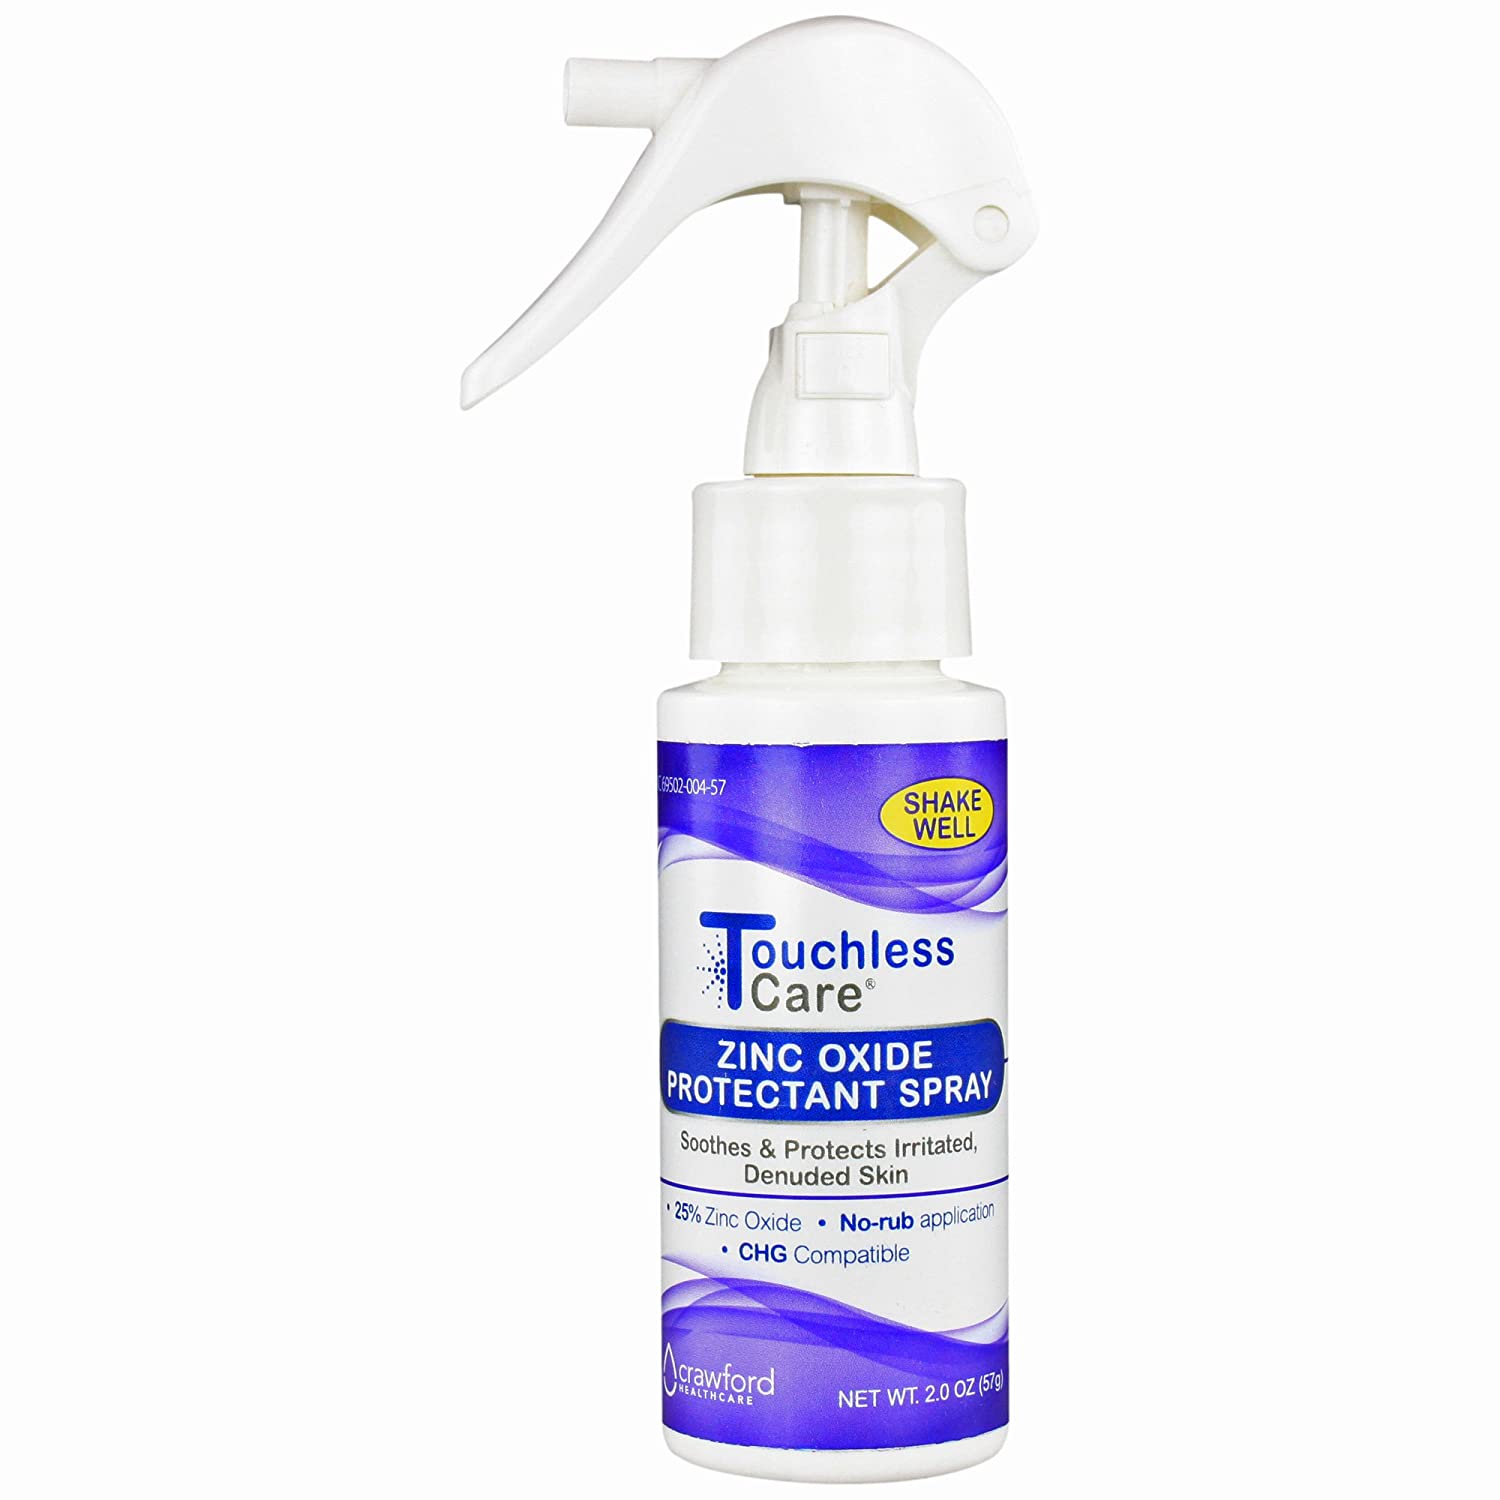 Touchless Care 62402 Zinc Oxide Protectant Spray (Each) - image 1 of 2